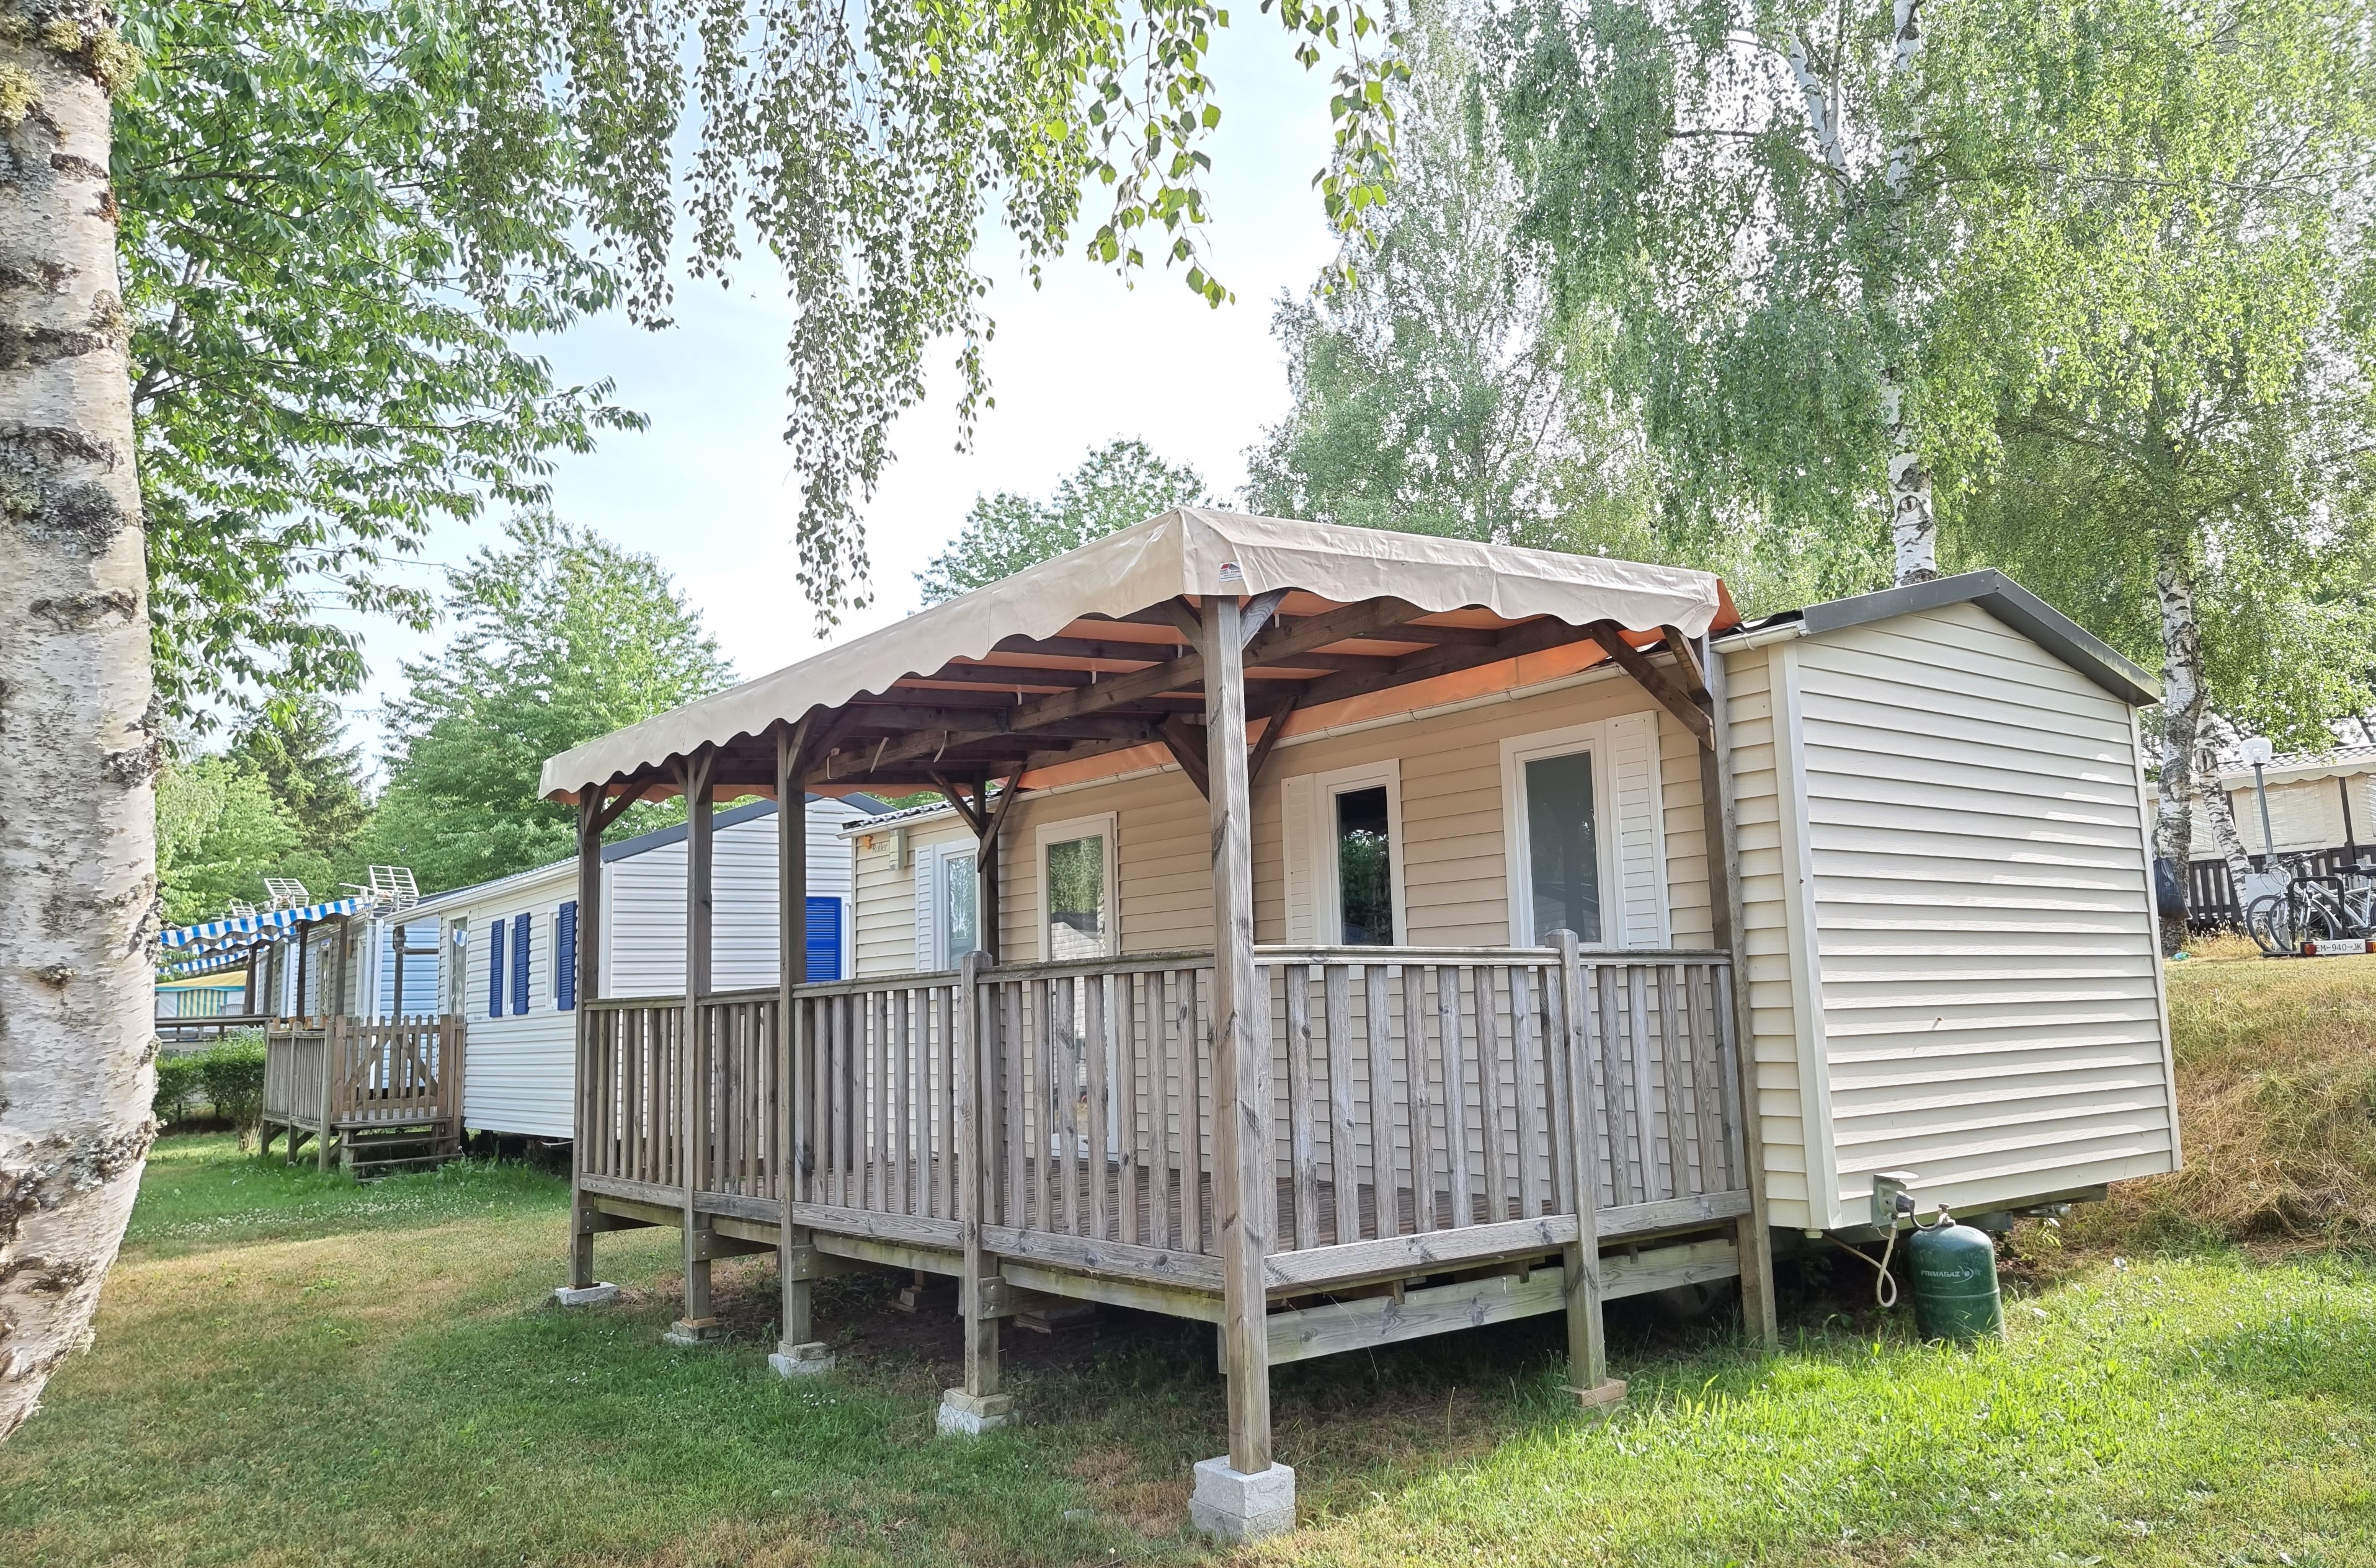 Accommodation - Mobile-Home Sunroller 26M2. Year 2013, Arrival Day On Sunday In The High Season - Camping SOLEIL LEVANT